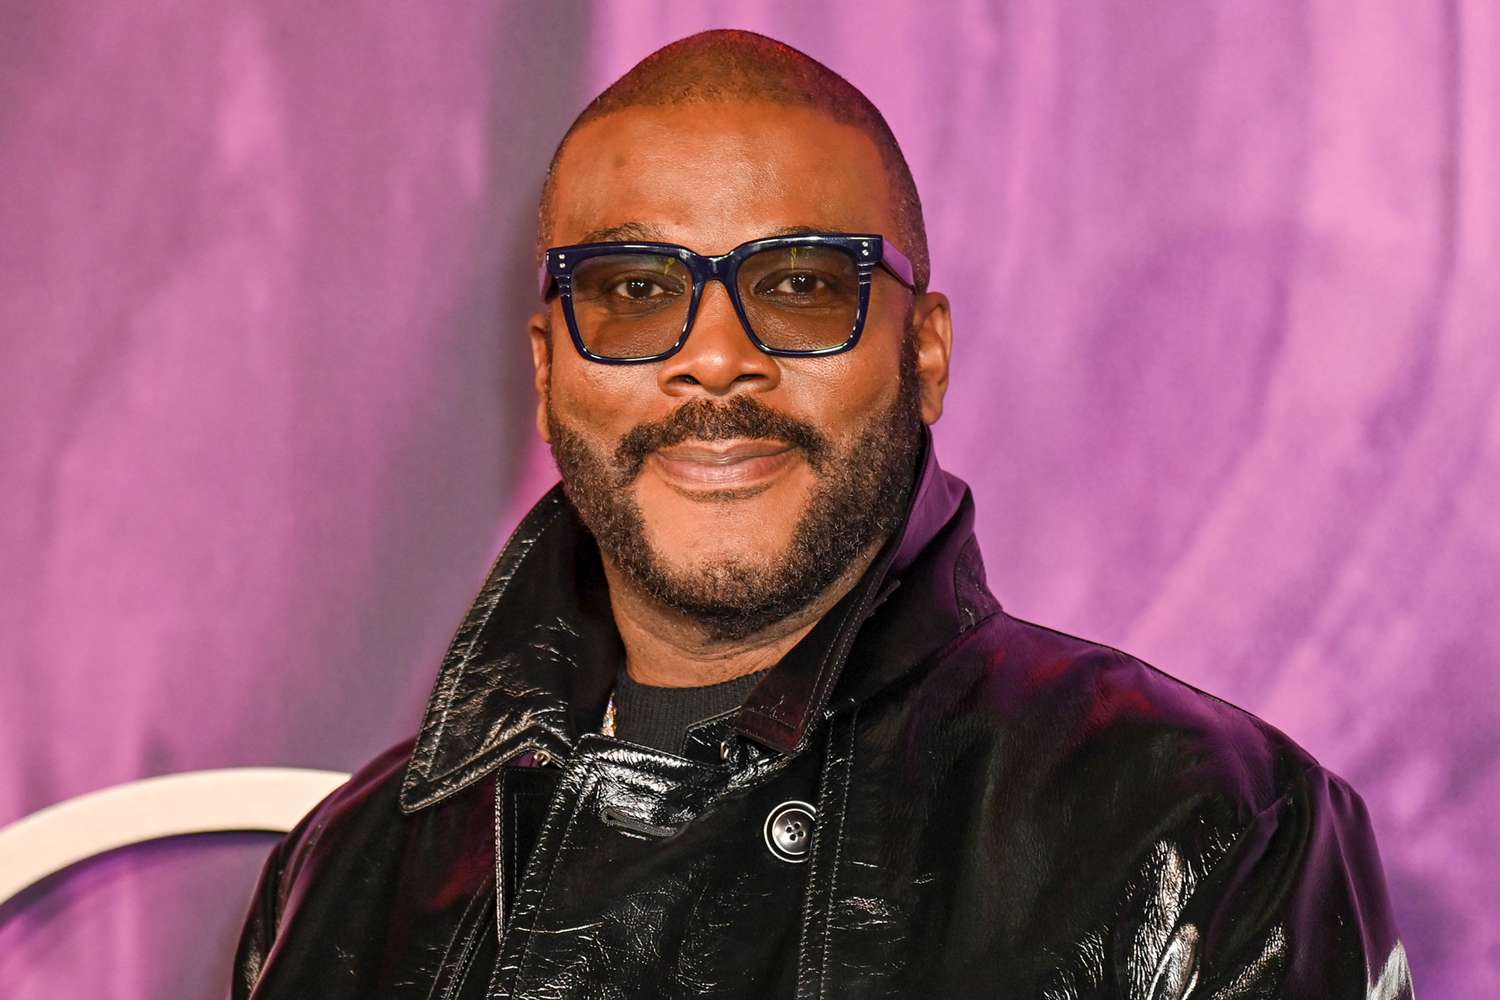 Tyler Perry blasts 'highbrow' critics of his movies: 'Get out of here with that bulls---'